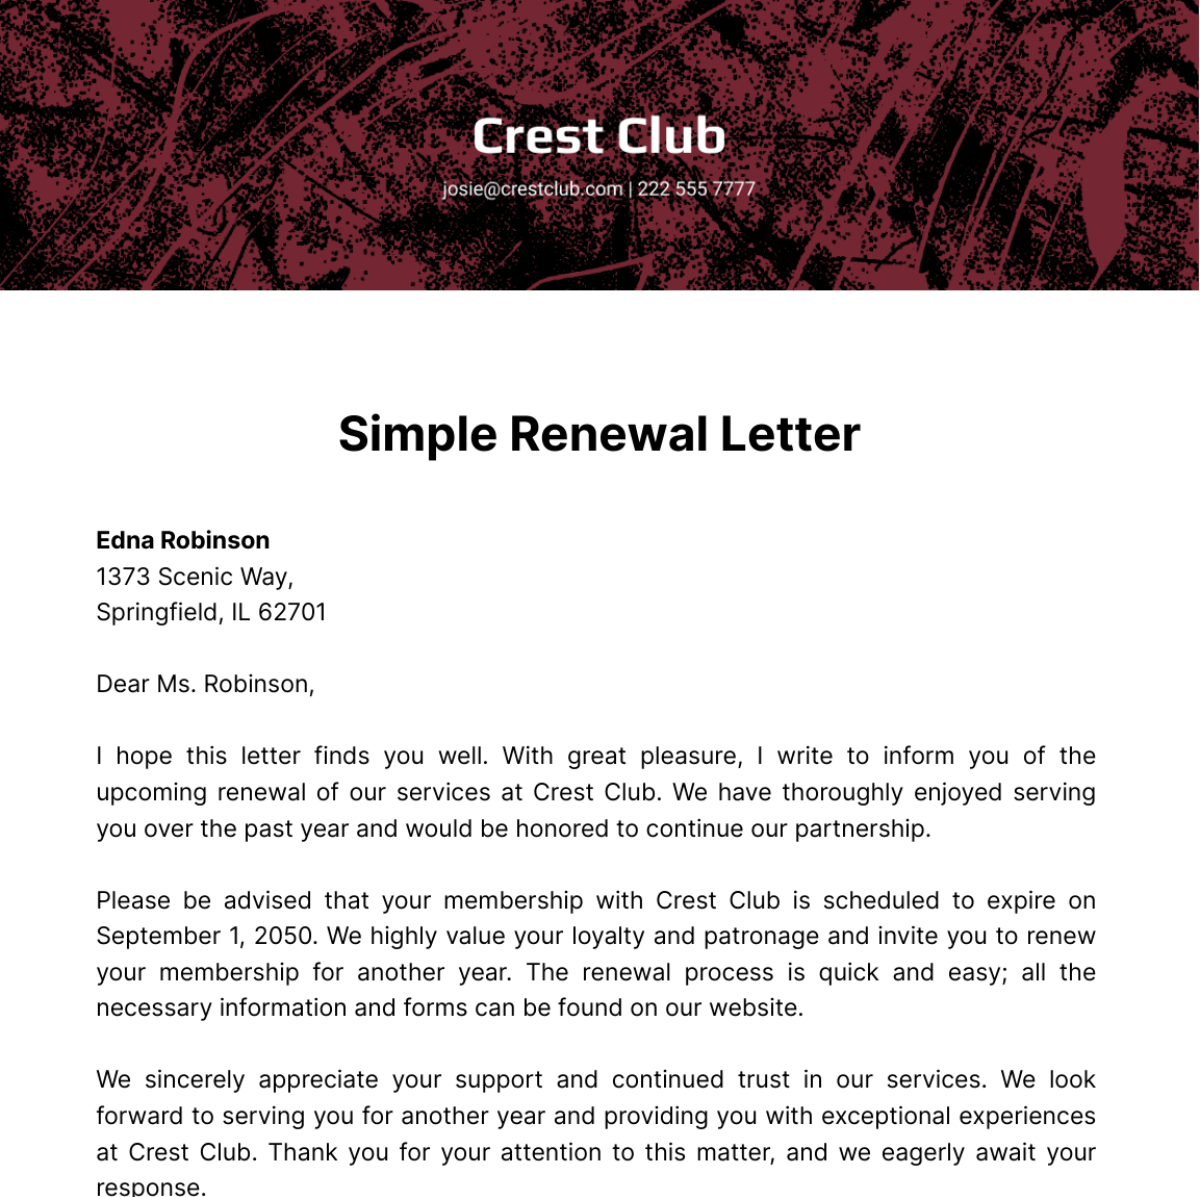 Simple Renewal Letter   Template